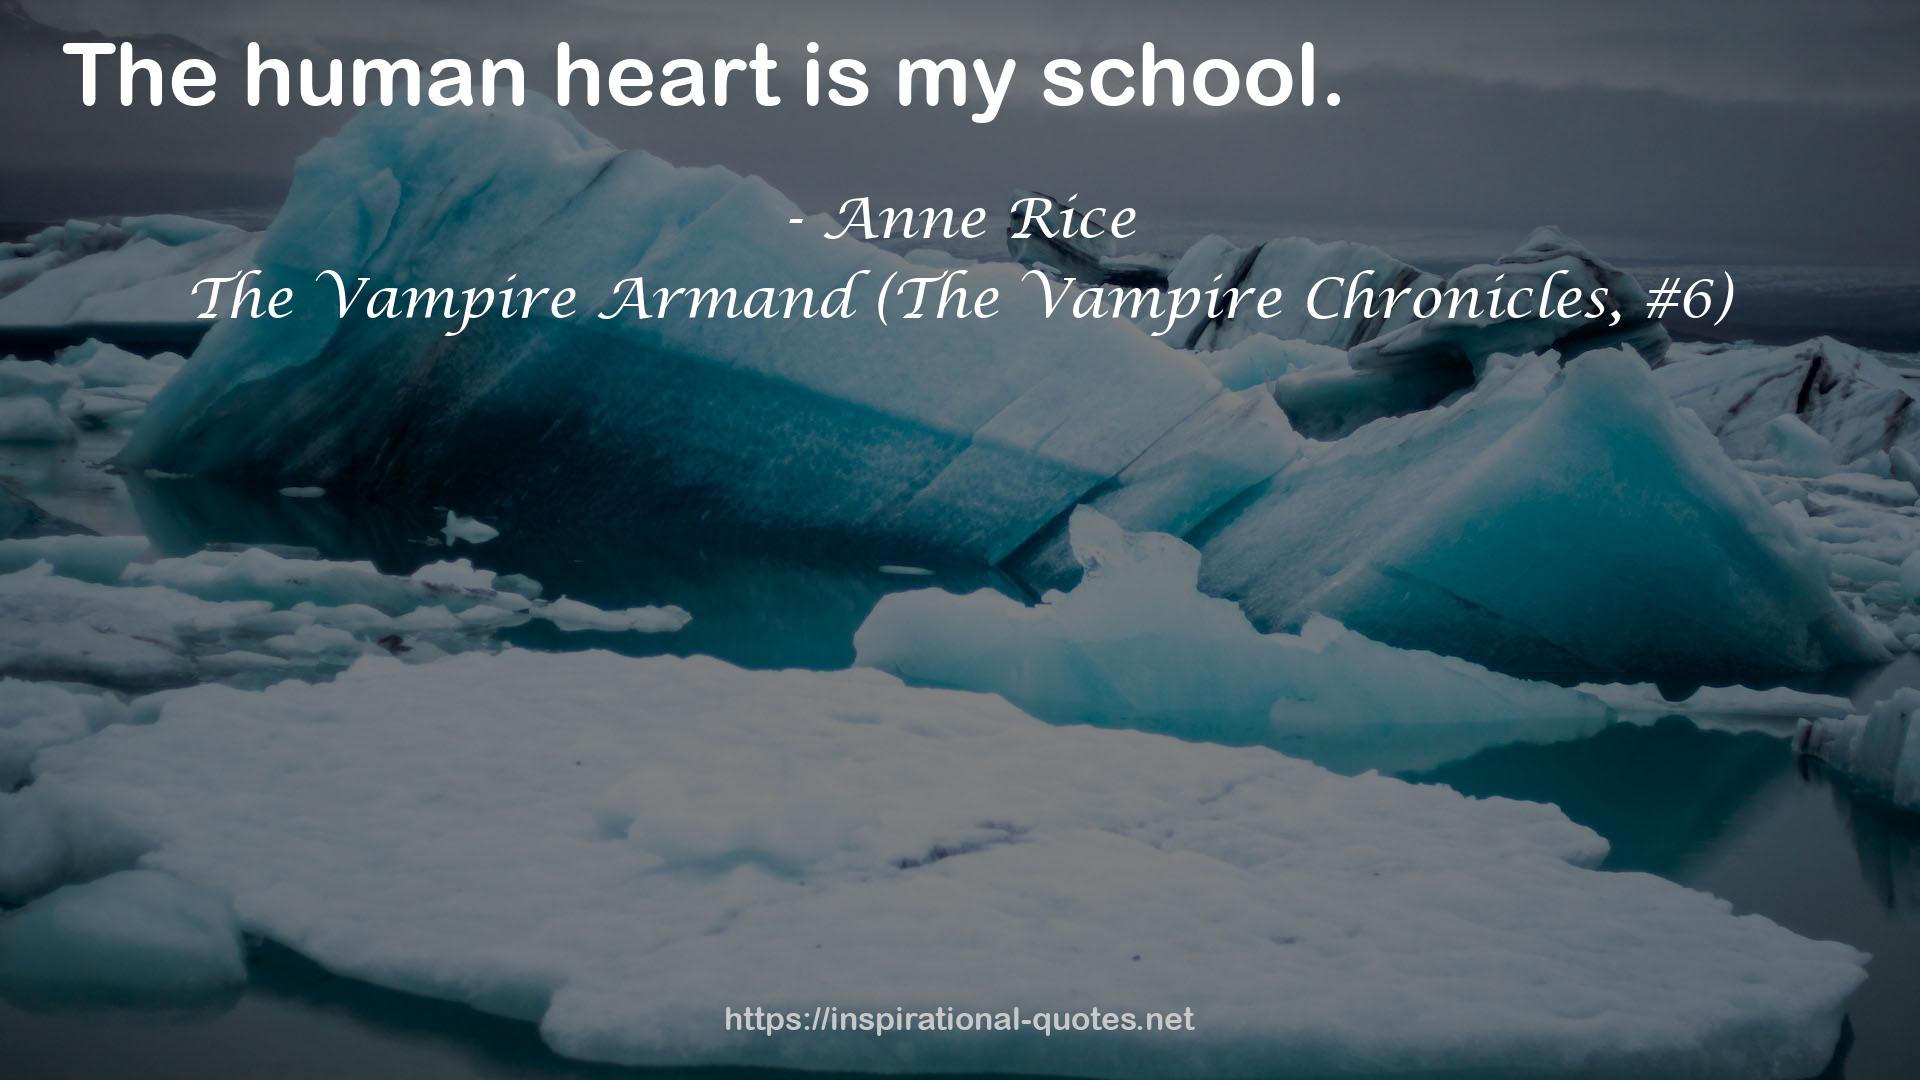 The Vampire Armand (The Vampire Chronicles, #6) QUOTES